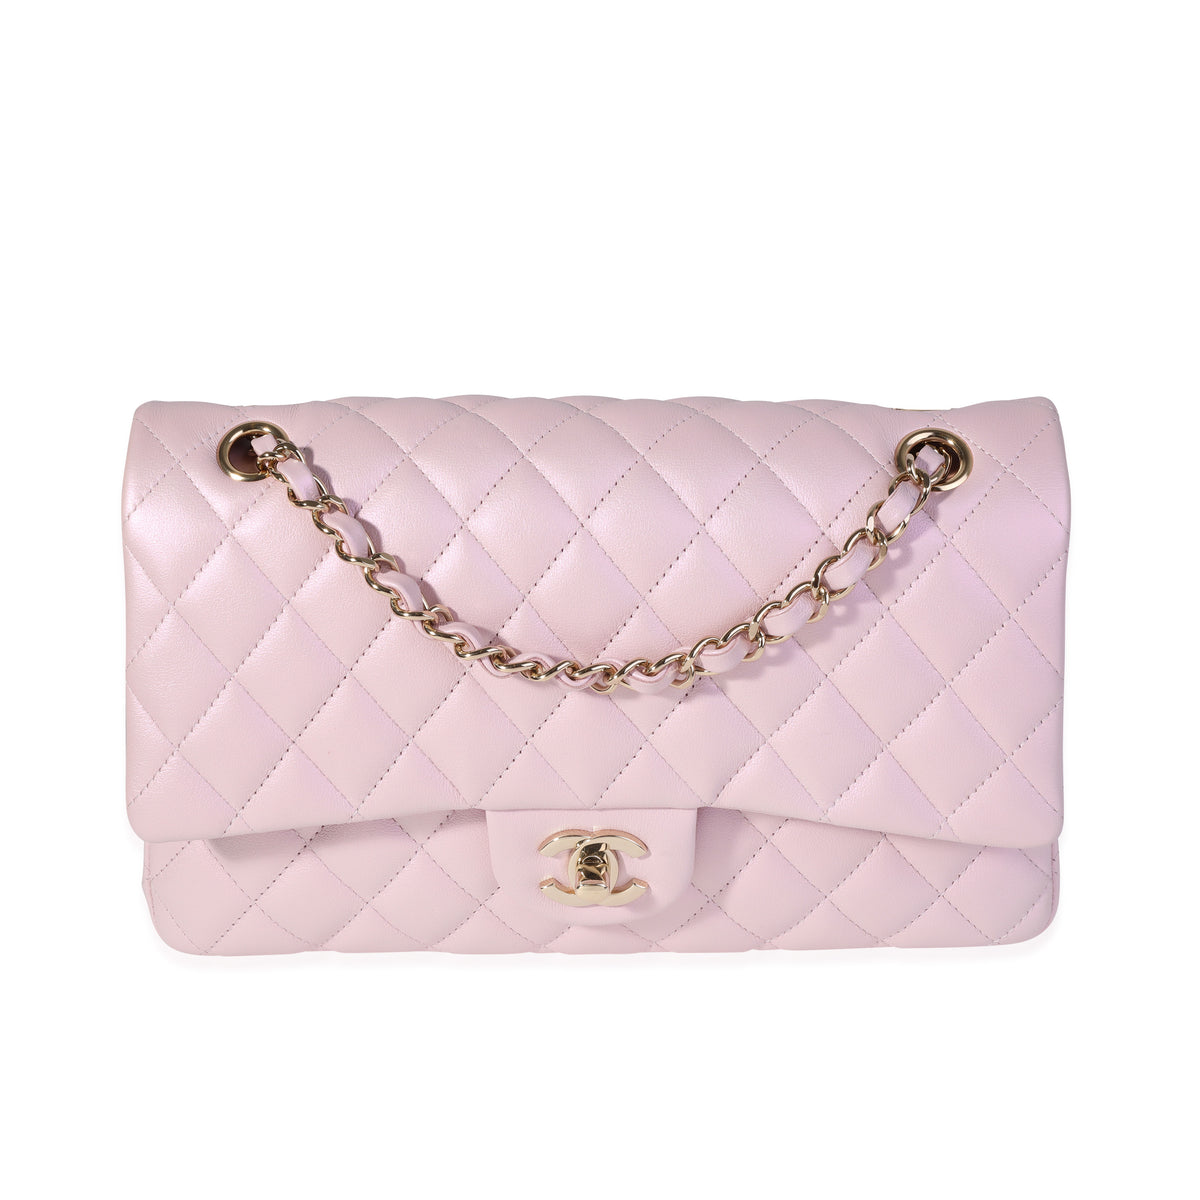 AUT CHANEL TIMELESS LUCKY CHARMS SINGLE FLAP SHOULDER BAG